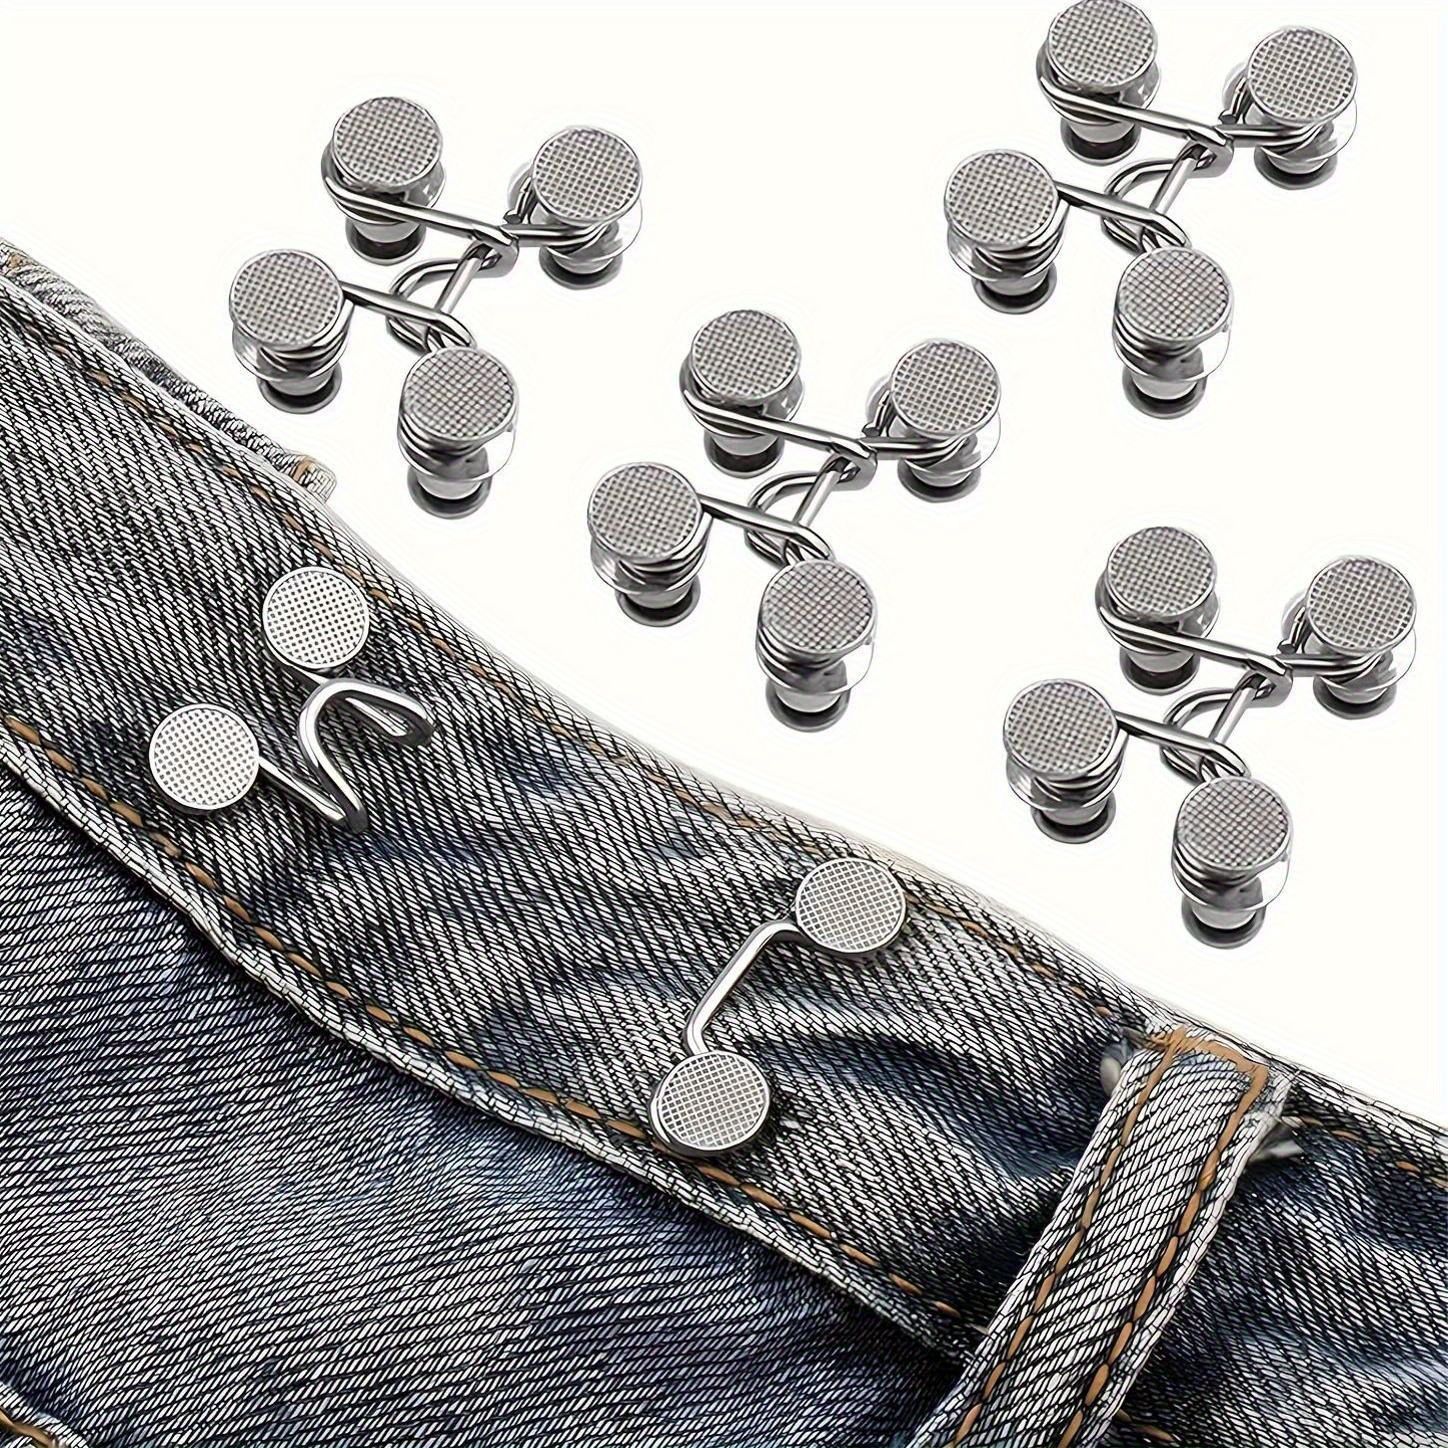 

4-piece Metal Jeans Waist Tightener Buttons - No-sew Adjustable Denim Waistband Reducer, Easy Install For Women's Pants